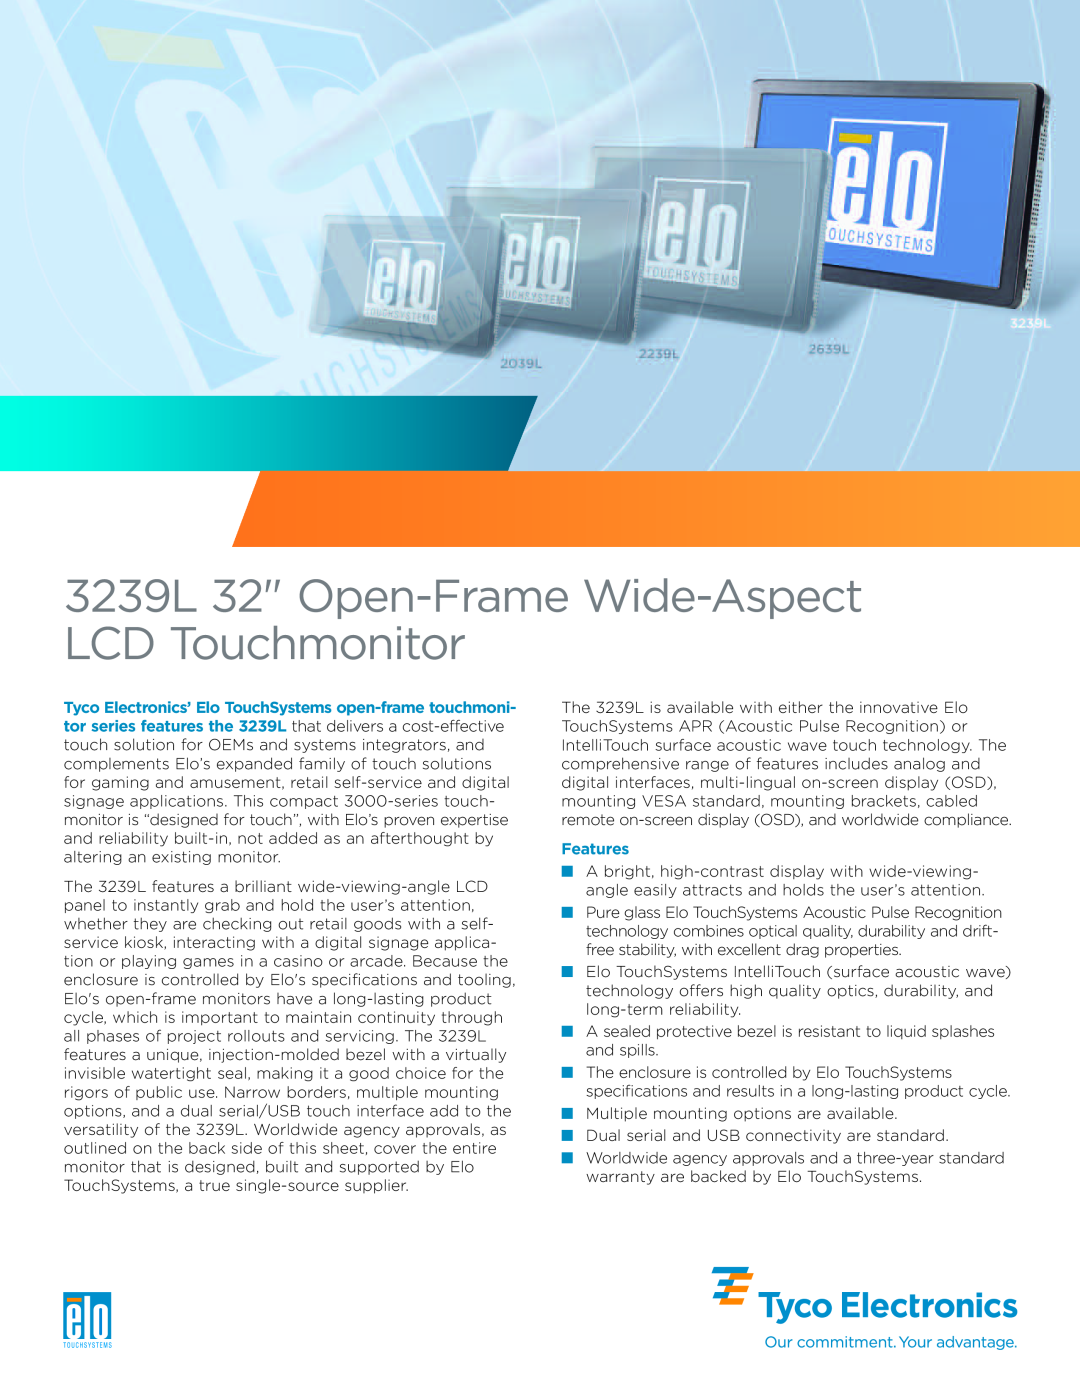 Tyco Electronics specifications Features, 3239L 32 Open-FrameWide-Aspect LCDTouchmonitor 